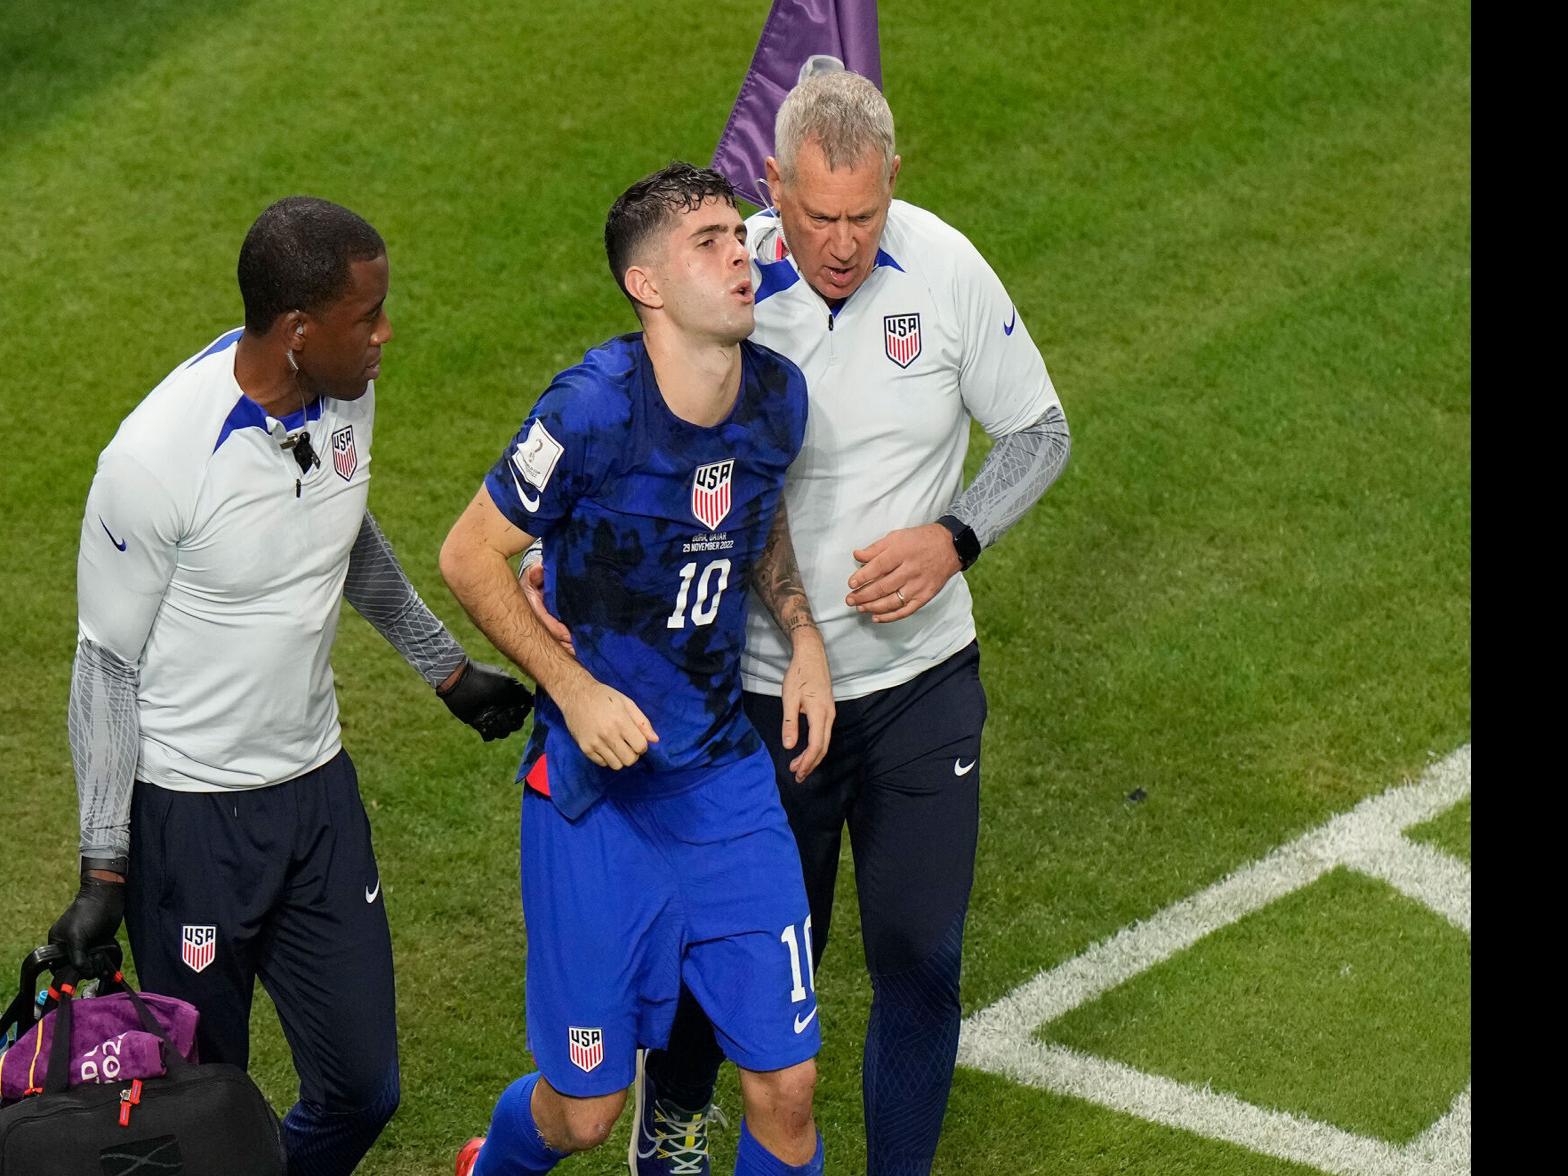 USMNT knocked out of World Cup in round of 16 by clinical Netherlands